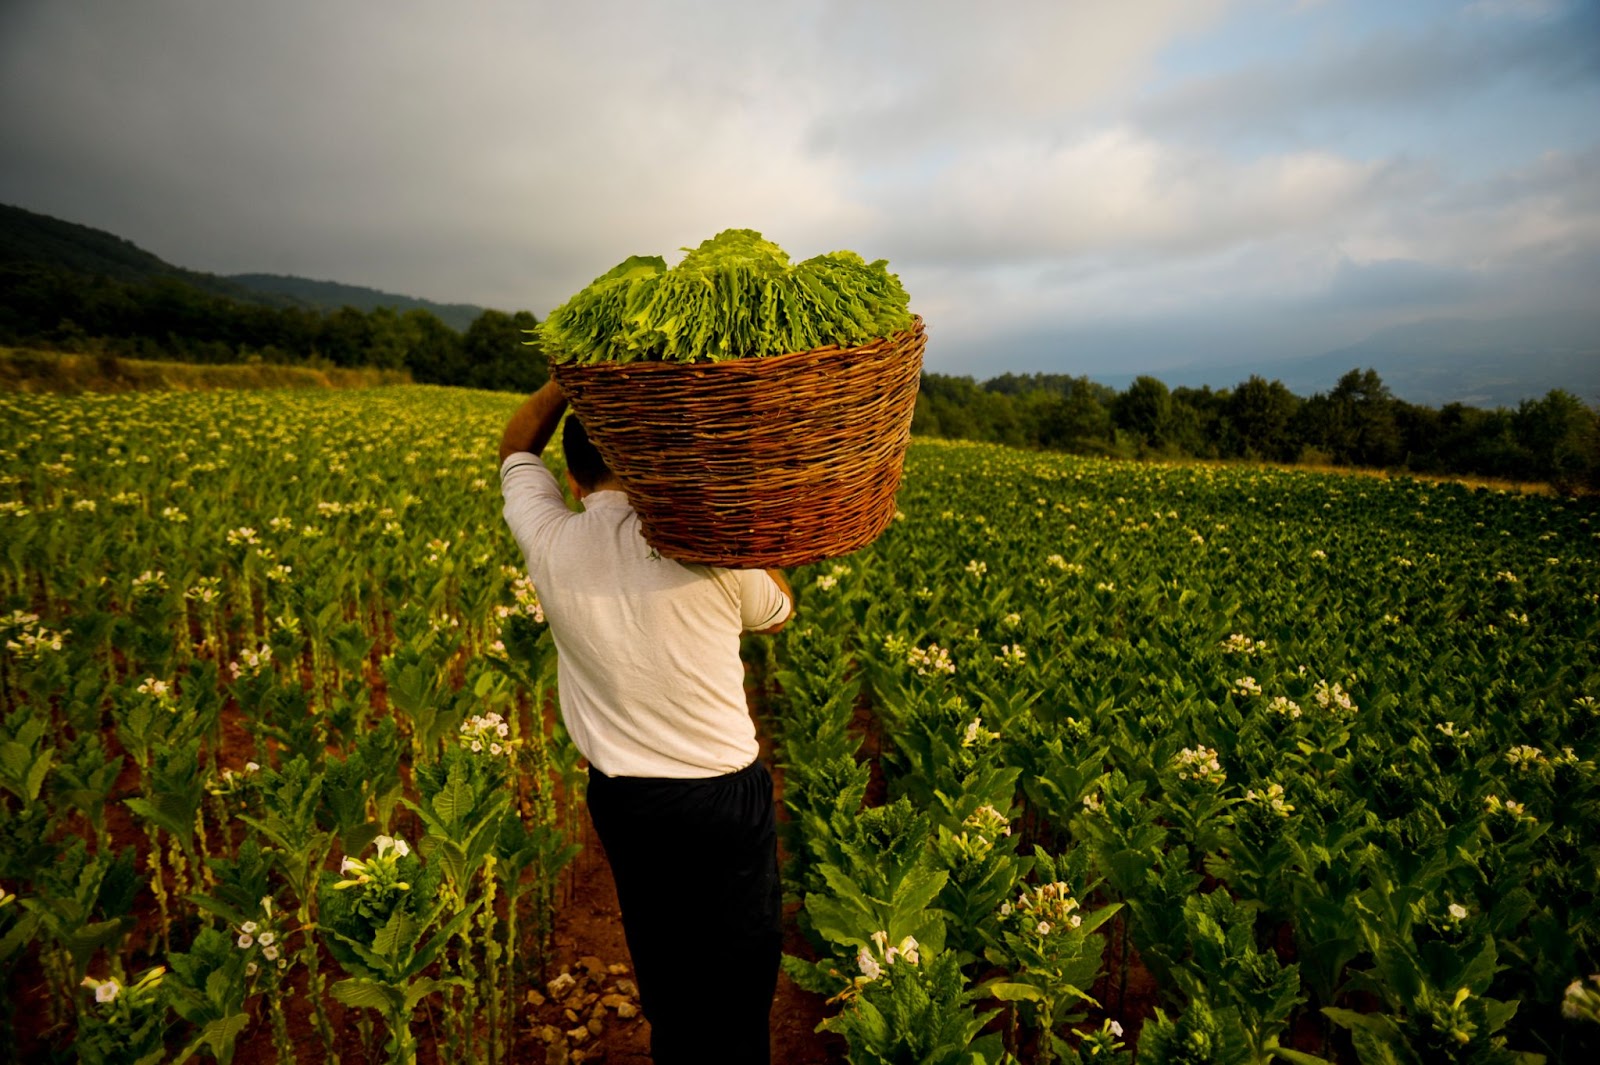 Real farmer carrying a basket full of ruffled tobacco leaves.ed